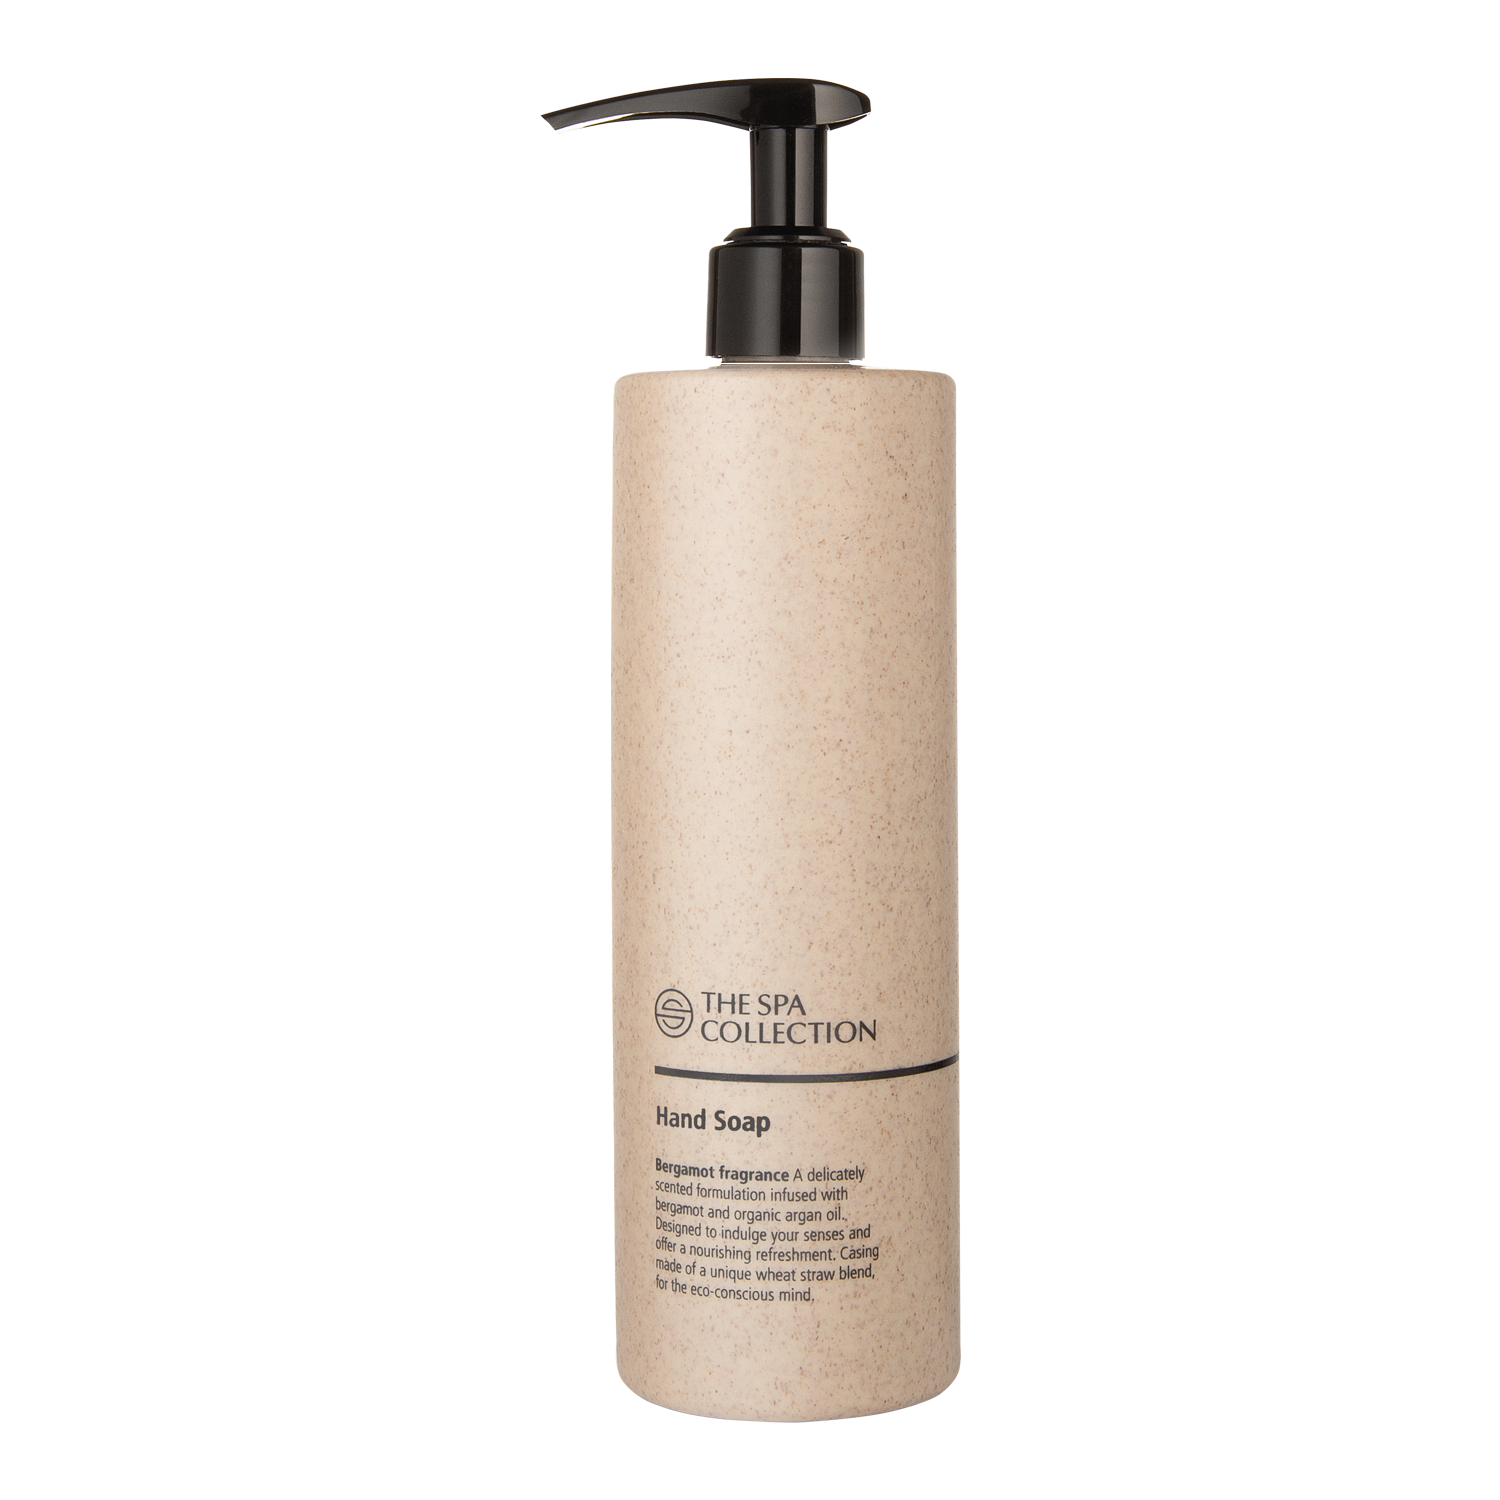 THE SPA COLLECTION Doppel-Wandhalter  400 ml